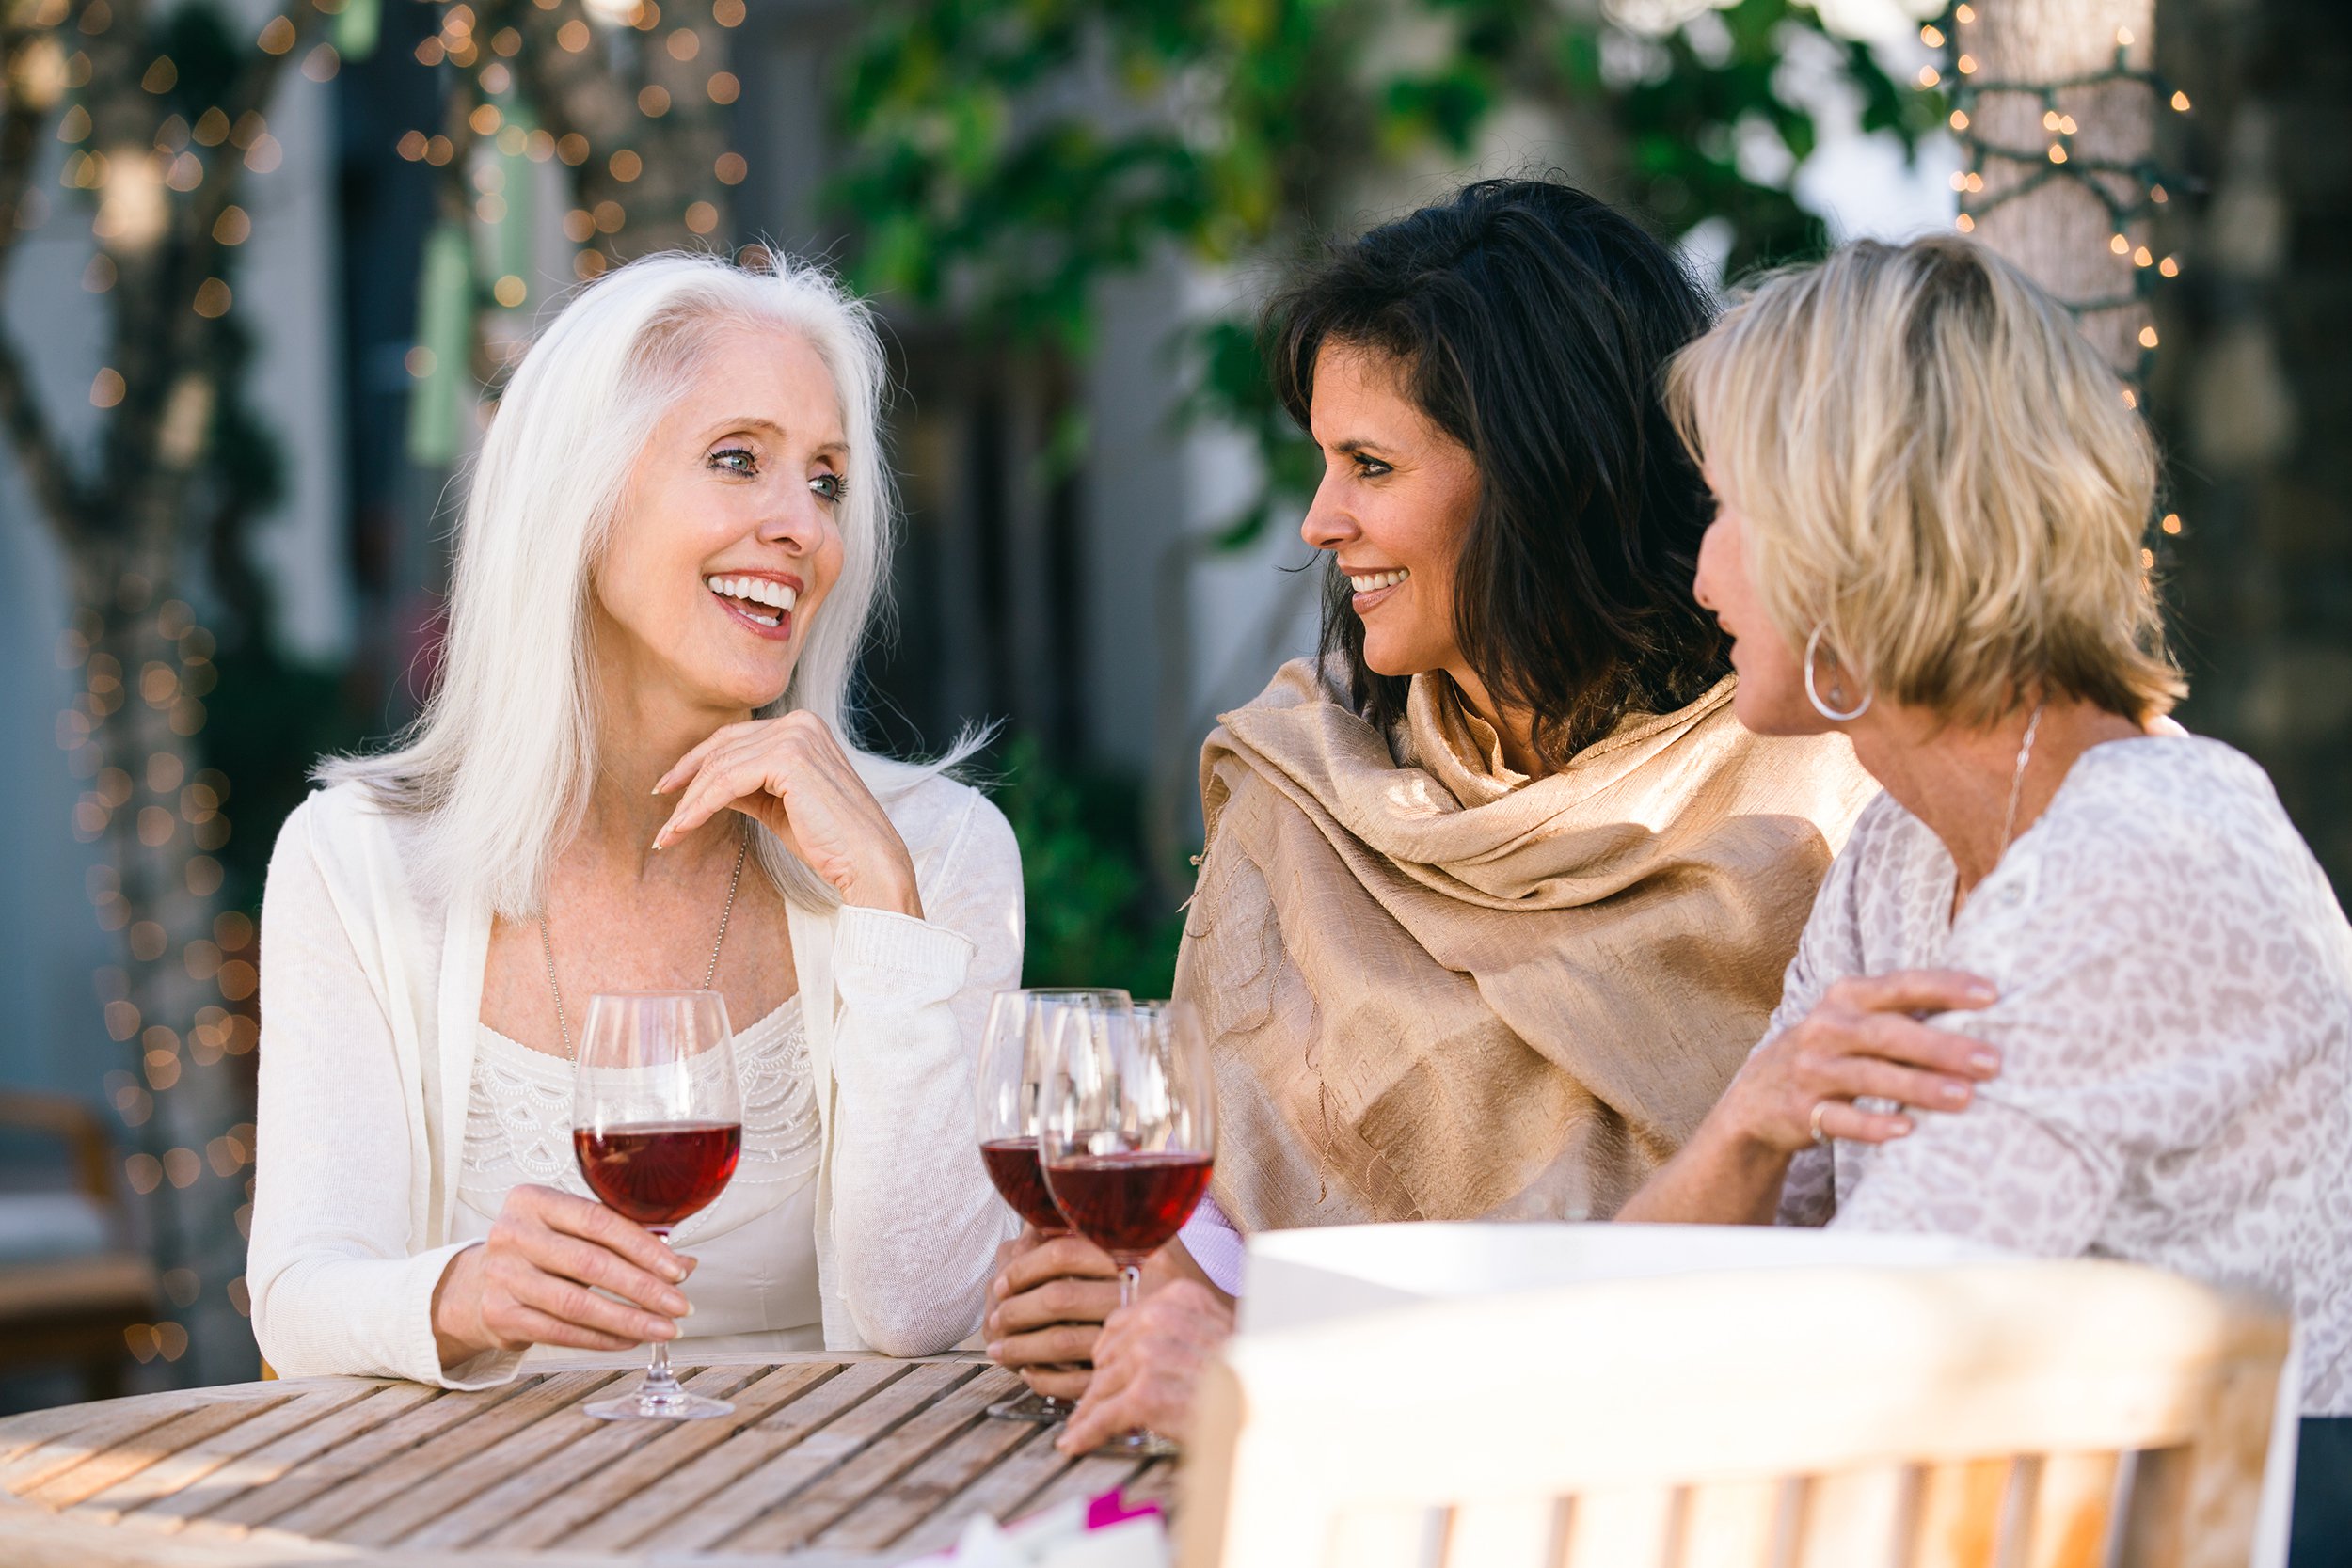 Staying healthy into your 80s and 90s doesn't have to mean enduring a puritanical existence. In fact, numerous studies have suggested that light to moderate drinkers actually <a href="https://www.reuters.com/article/us-health-alcohol-habits/can-drinking-a-little-bit-help-you-live-longer-idUSKCN1AU22U">live longer than those that abstain</a>. Enjoying a glass of wine in moderation not only can help you unwind at the end of the day, but may help <a href="https://blog.cheapism.com/heart-health/">reduce the risk of heart disease</a>, dementia, cancer, while also increasing your intake of healthy antioxidants. The key, of course, is avoiding heavy drinking, which can have an adverse impact on your health.